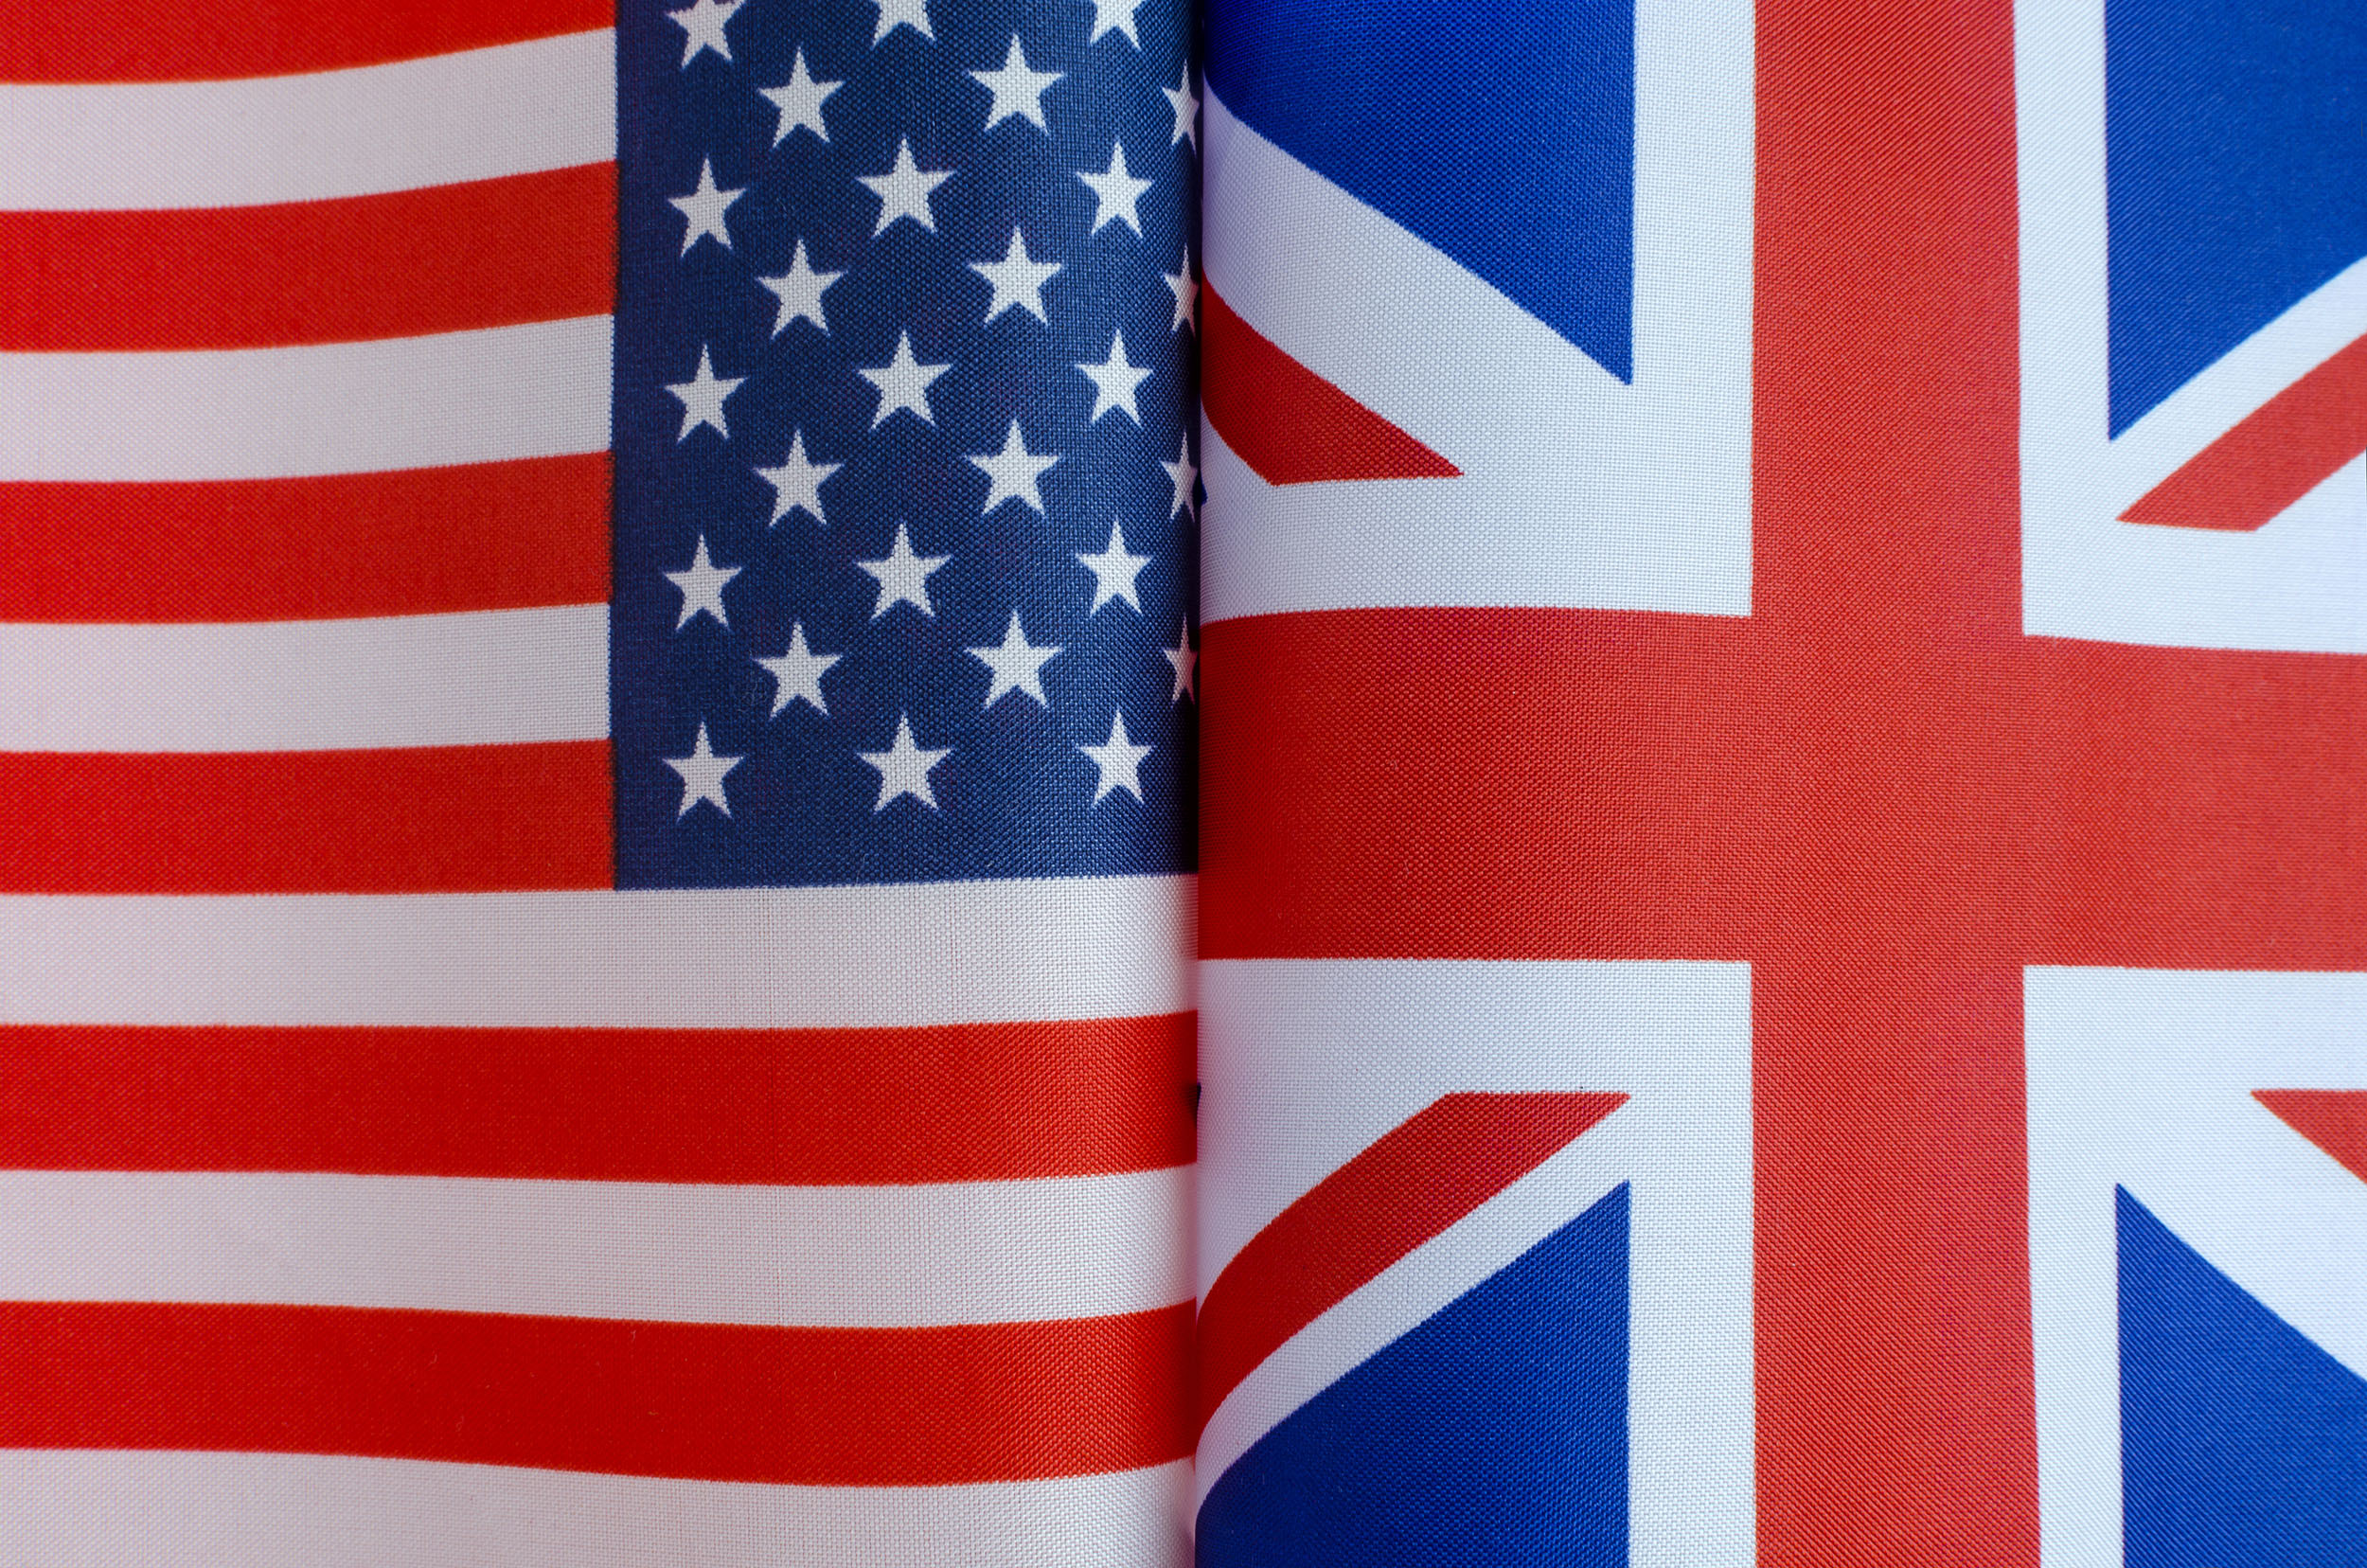 Differences between British and American English